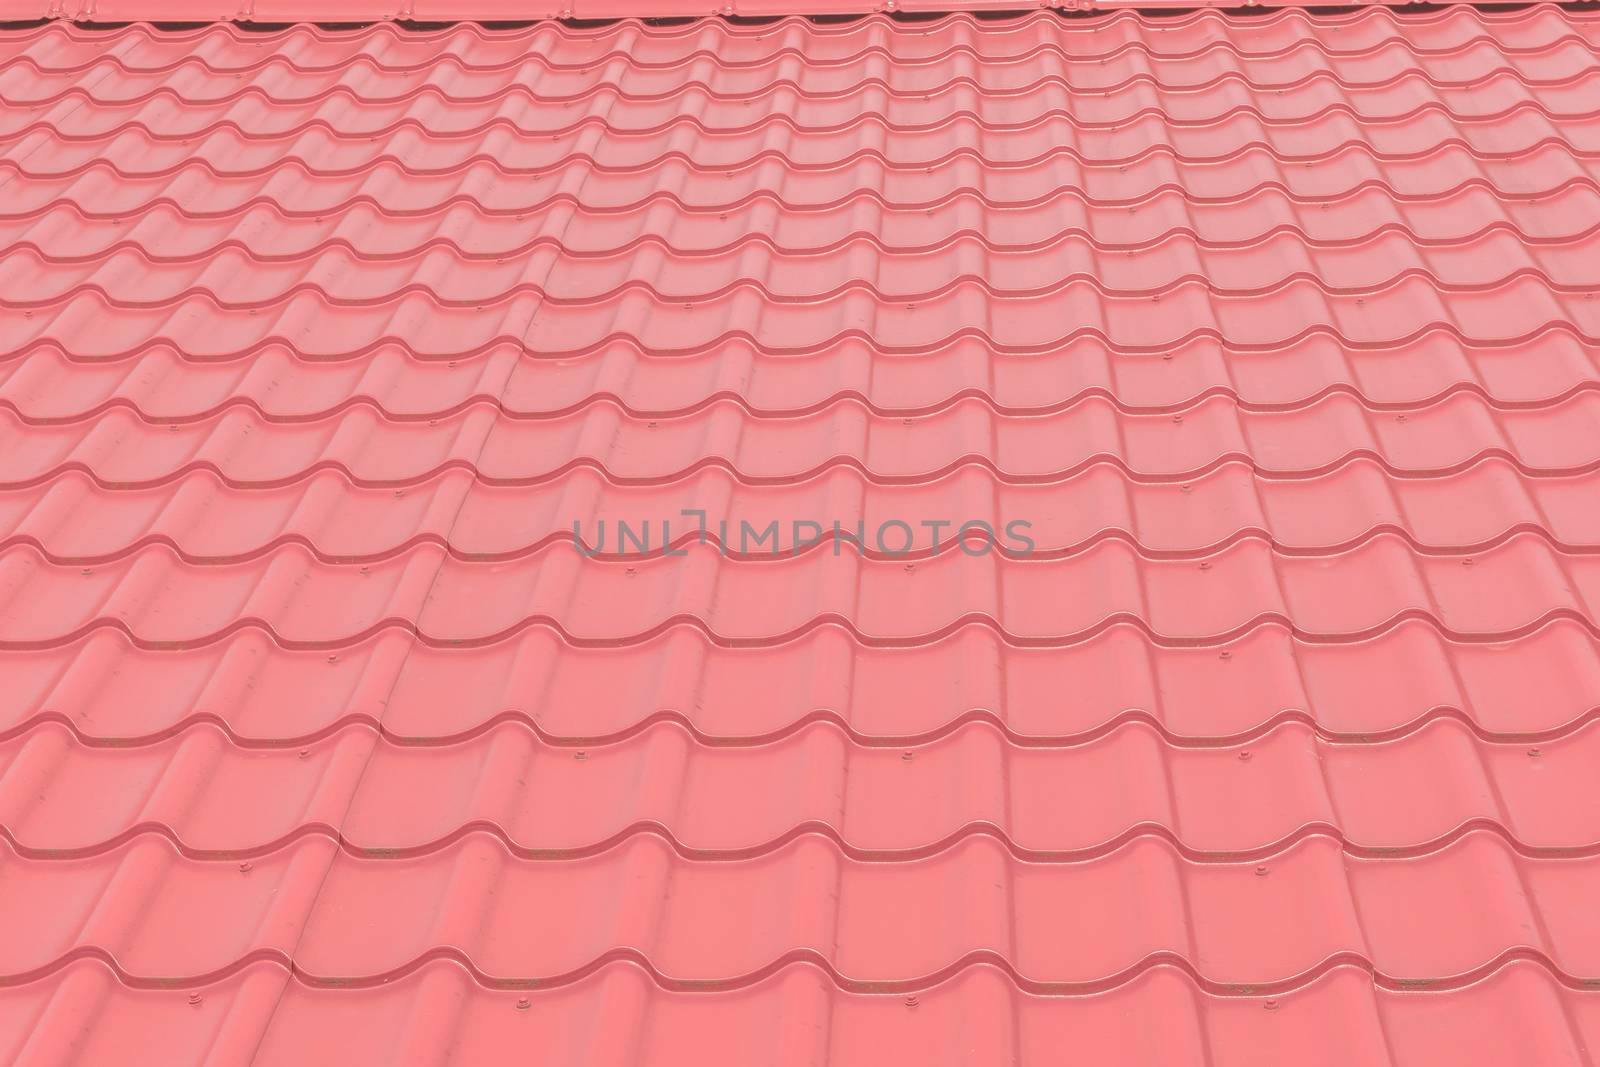 modern bright light pink glossy rooftop tiling texture background